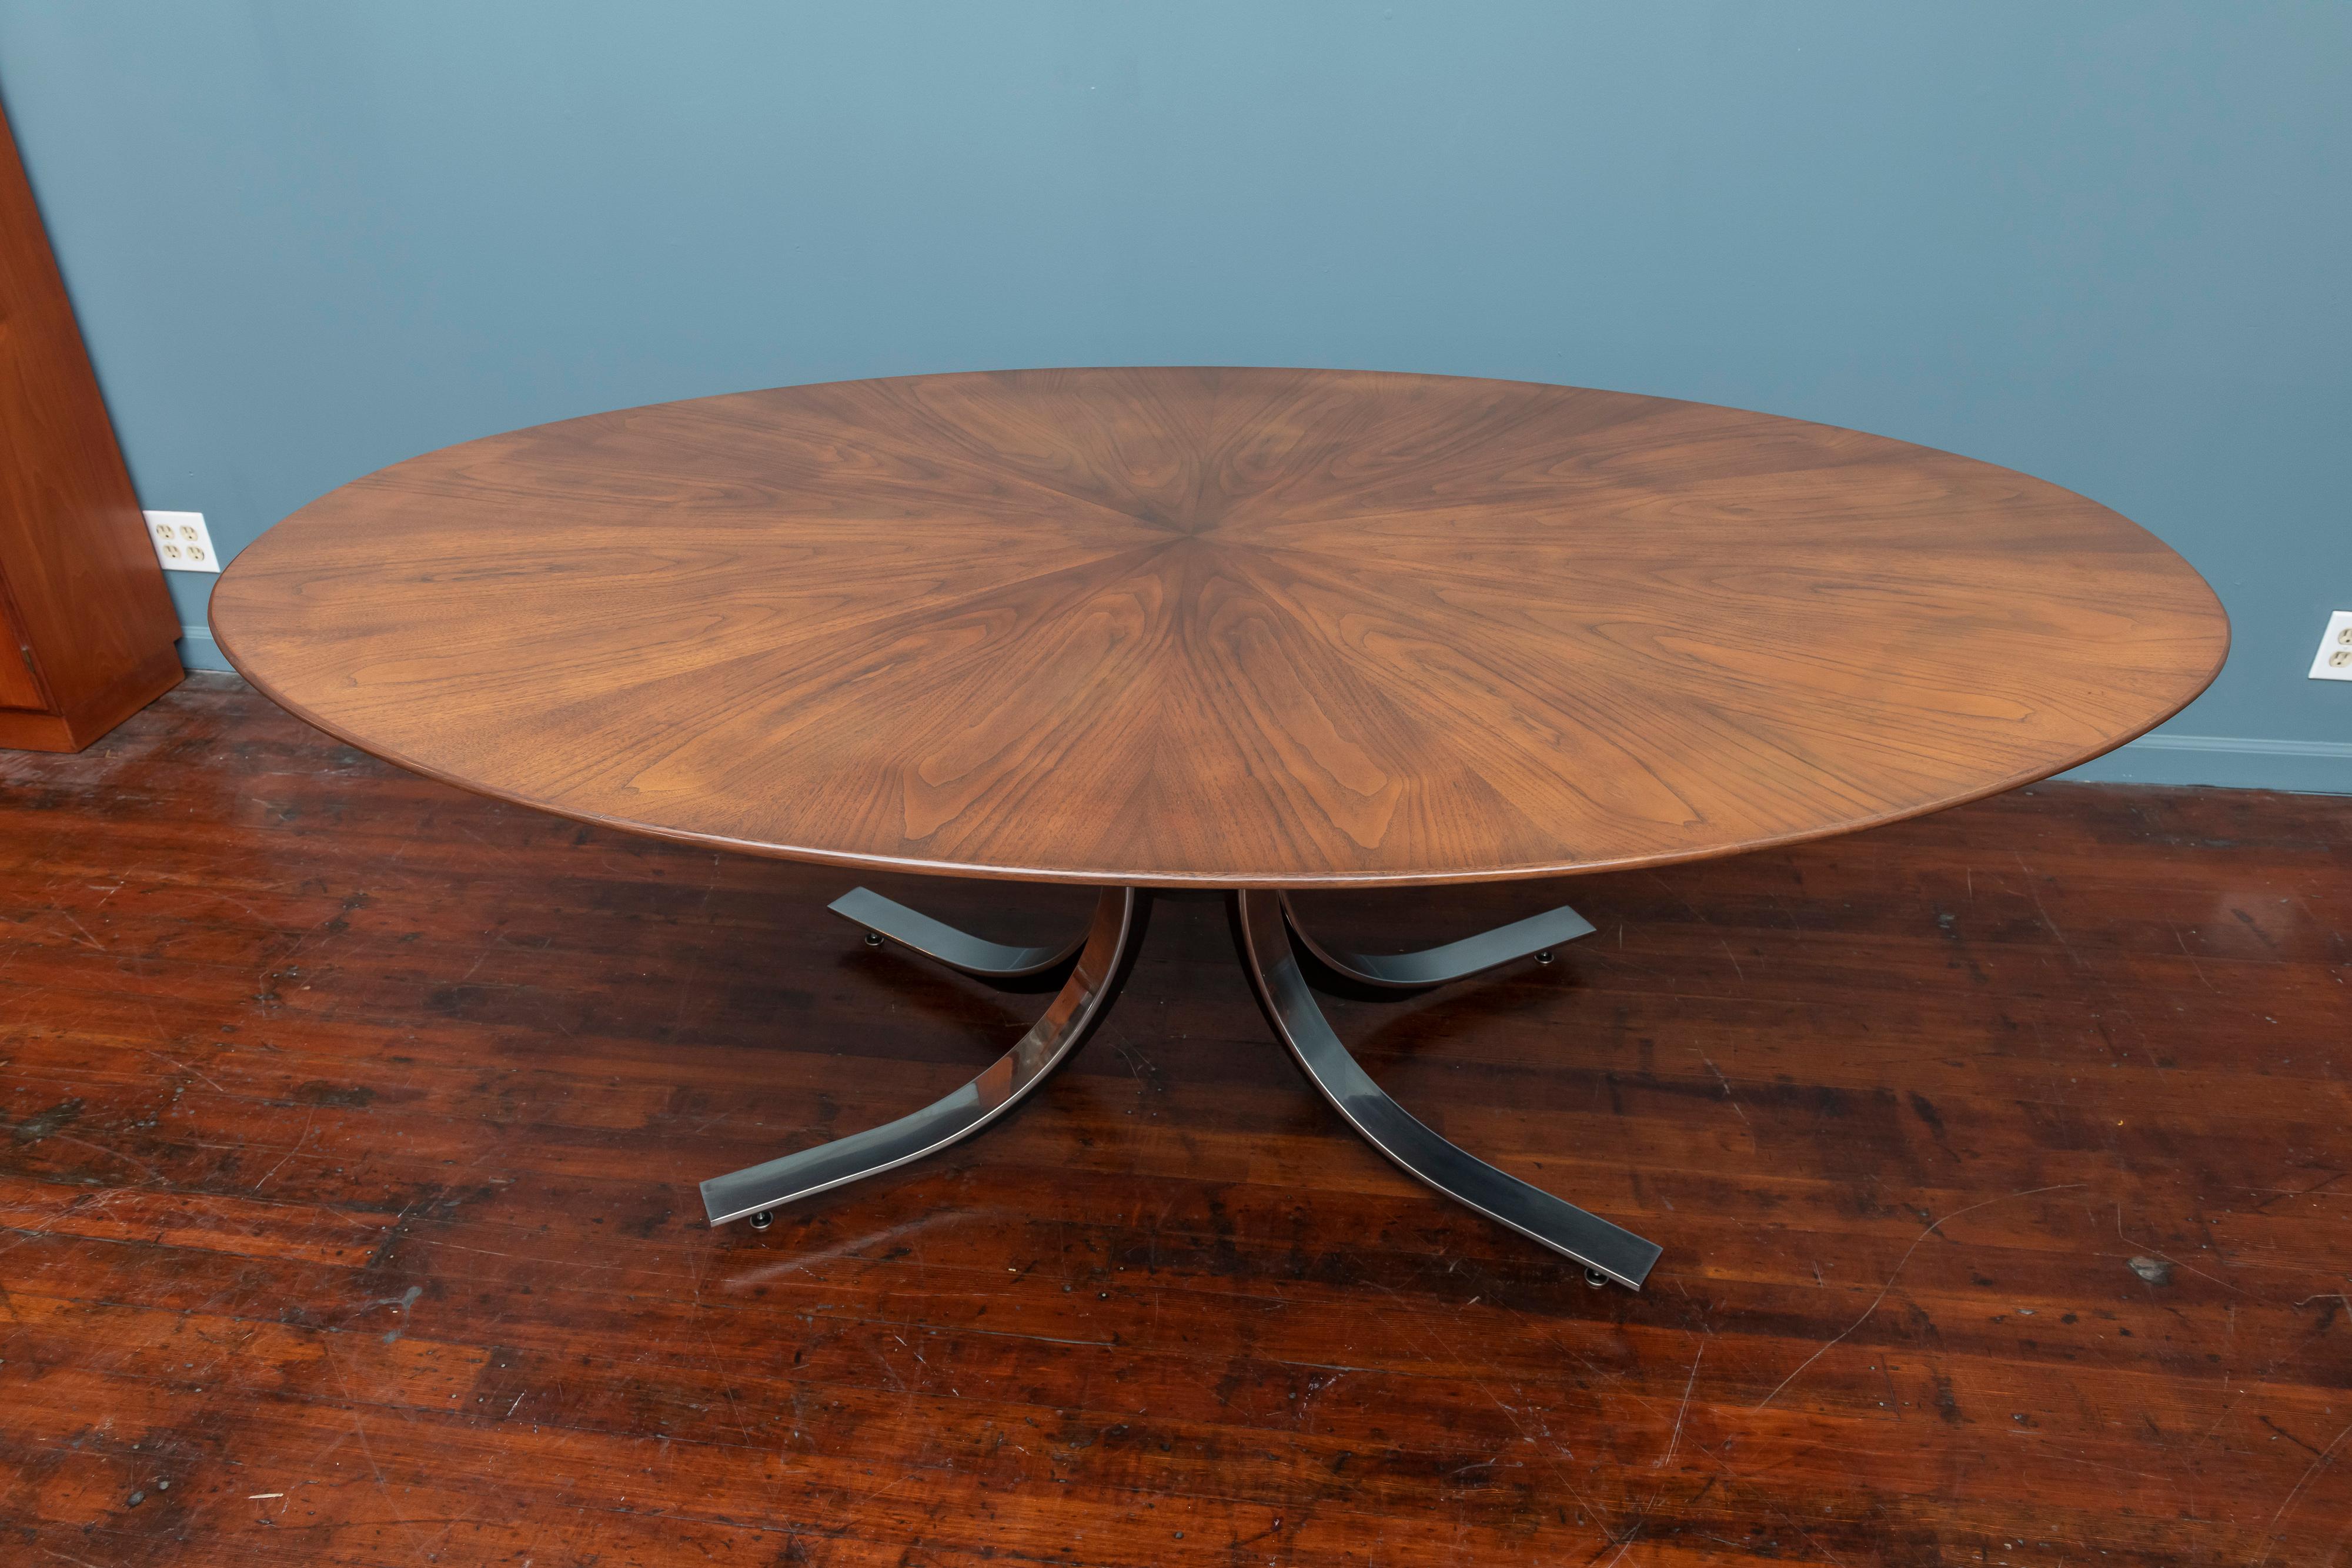 Osvaldo Borsani design sunburst walnut veneer top dining table on a sculptural chrome and steel splayed leg base. Newly refinished top with age appropriate scuffs and wear to the chrome sleeved legs.